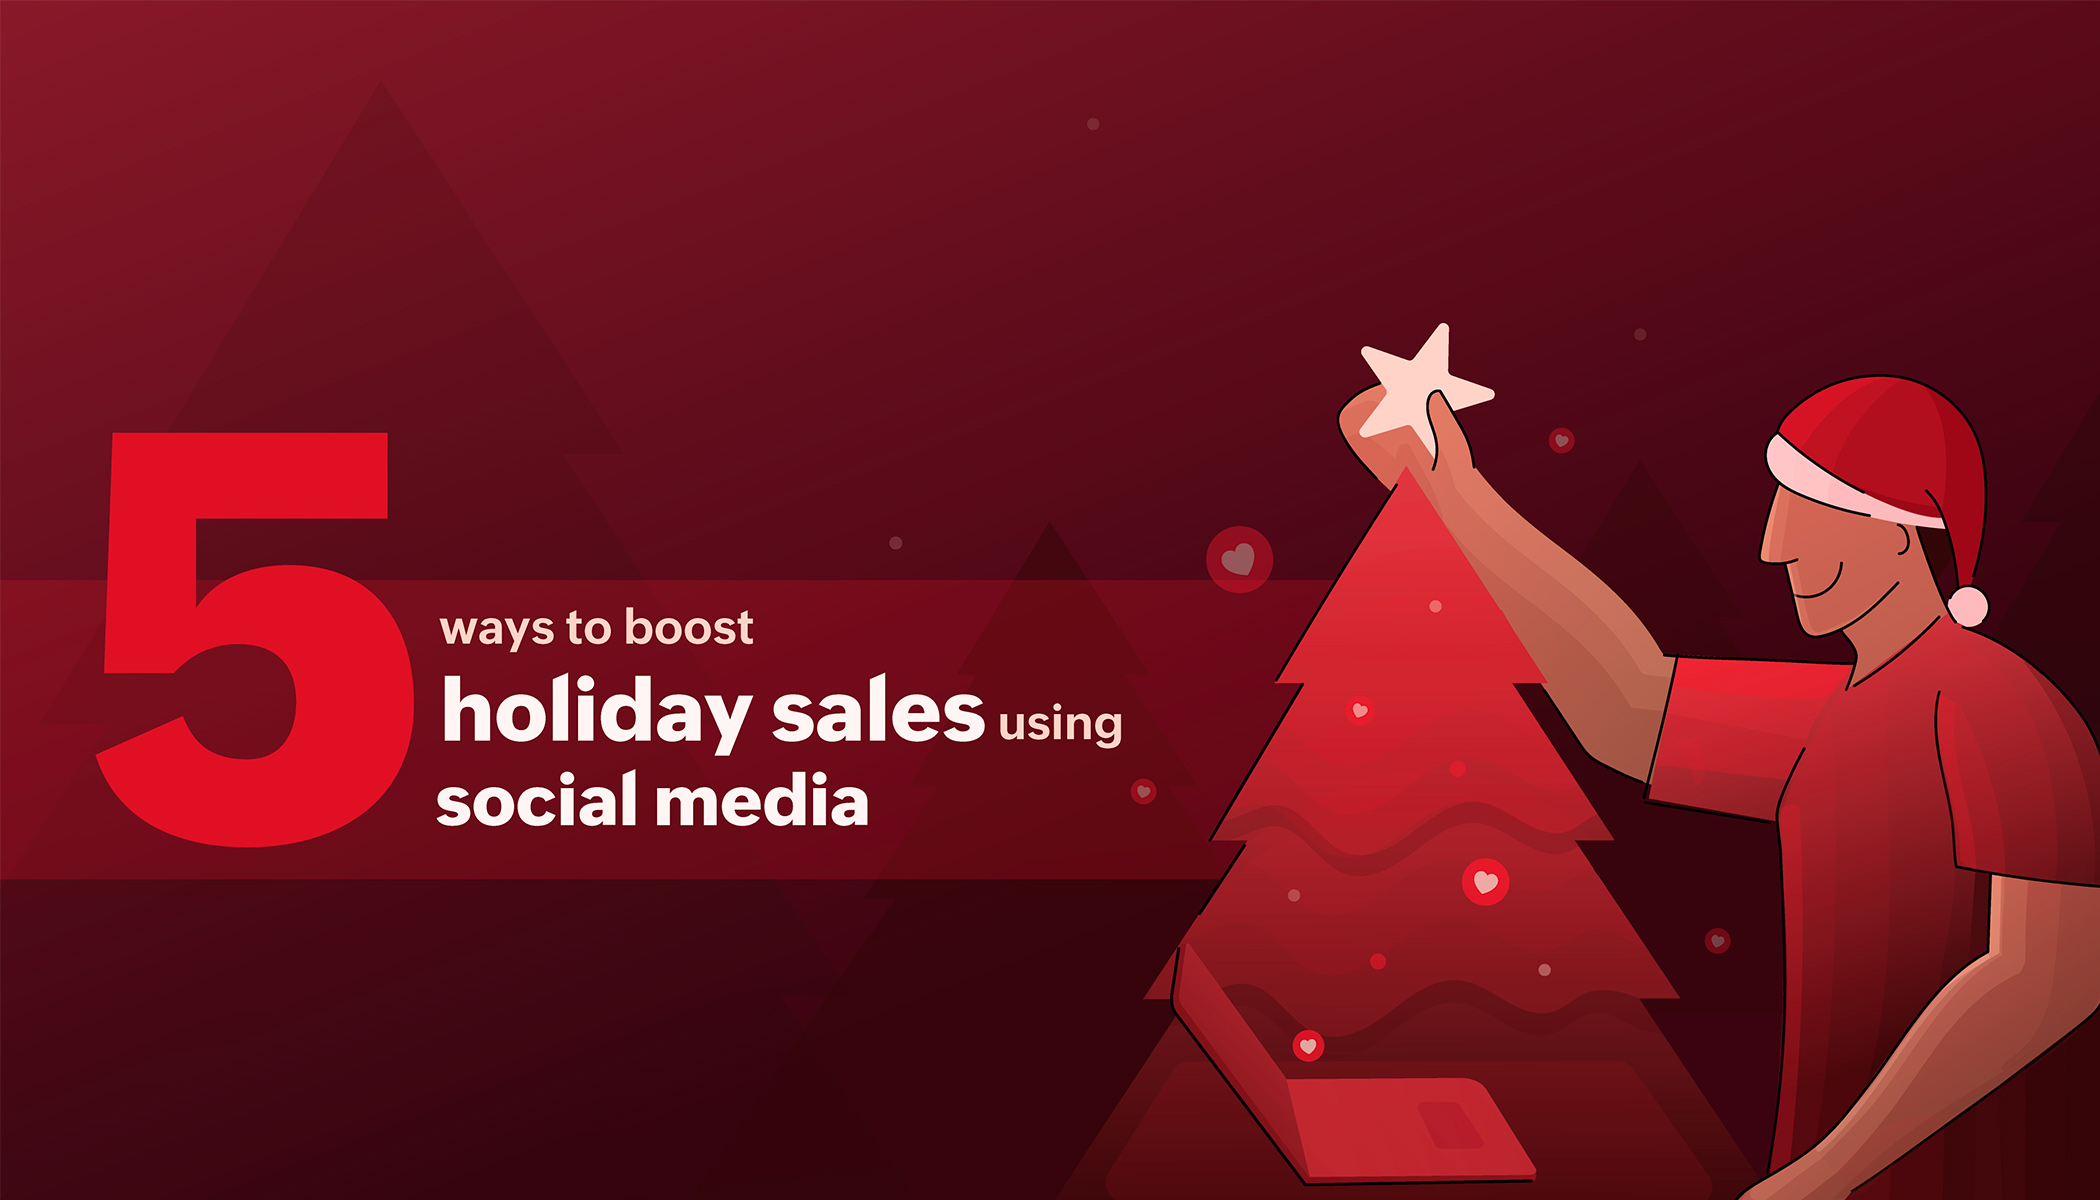 5 ways to boost holiday sales using social media